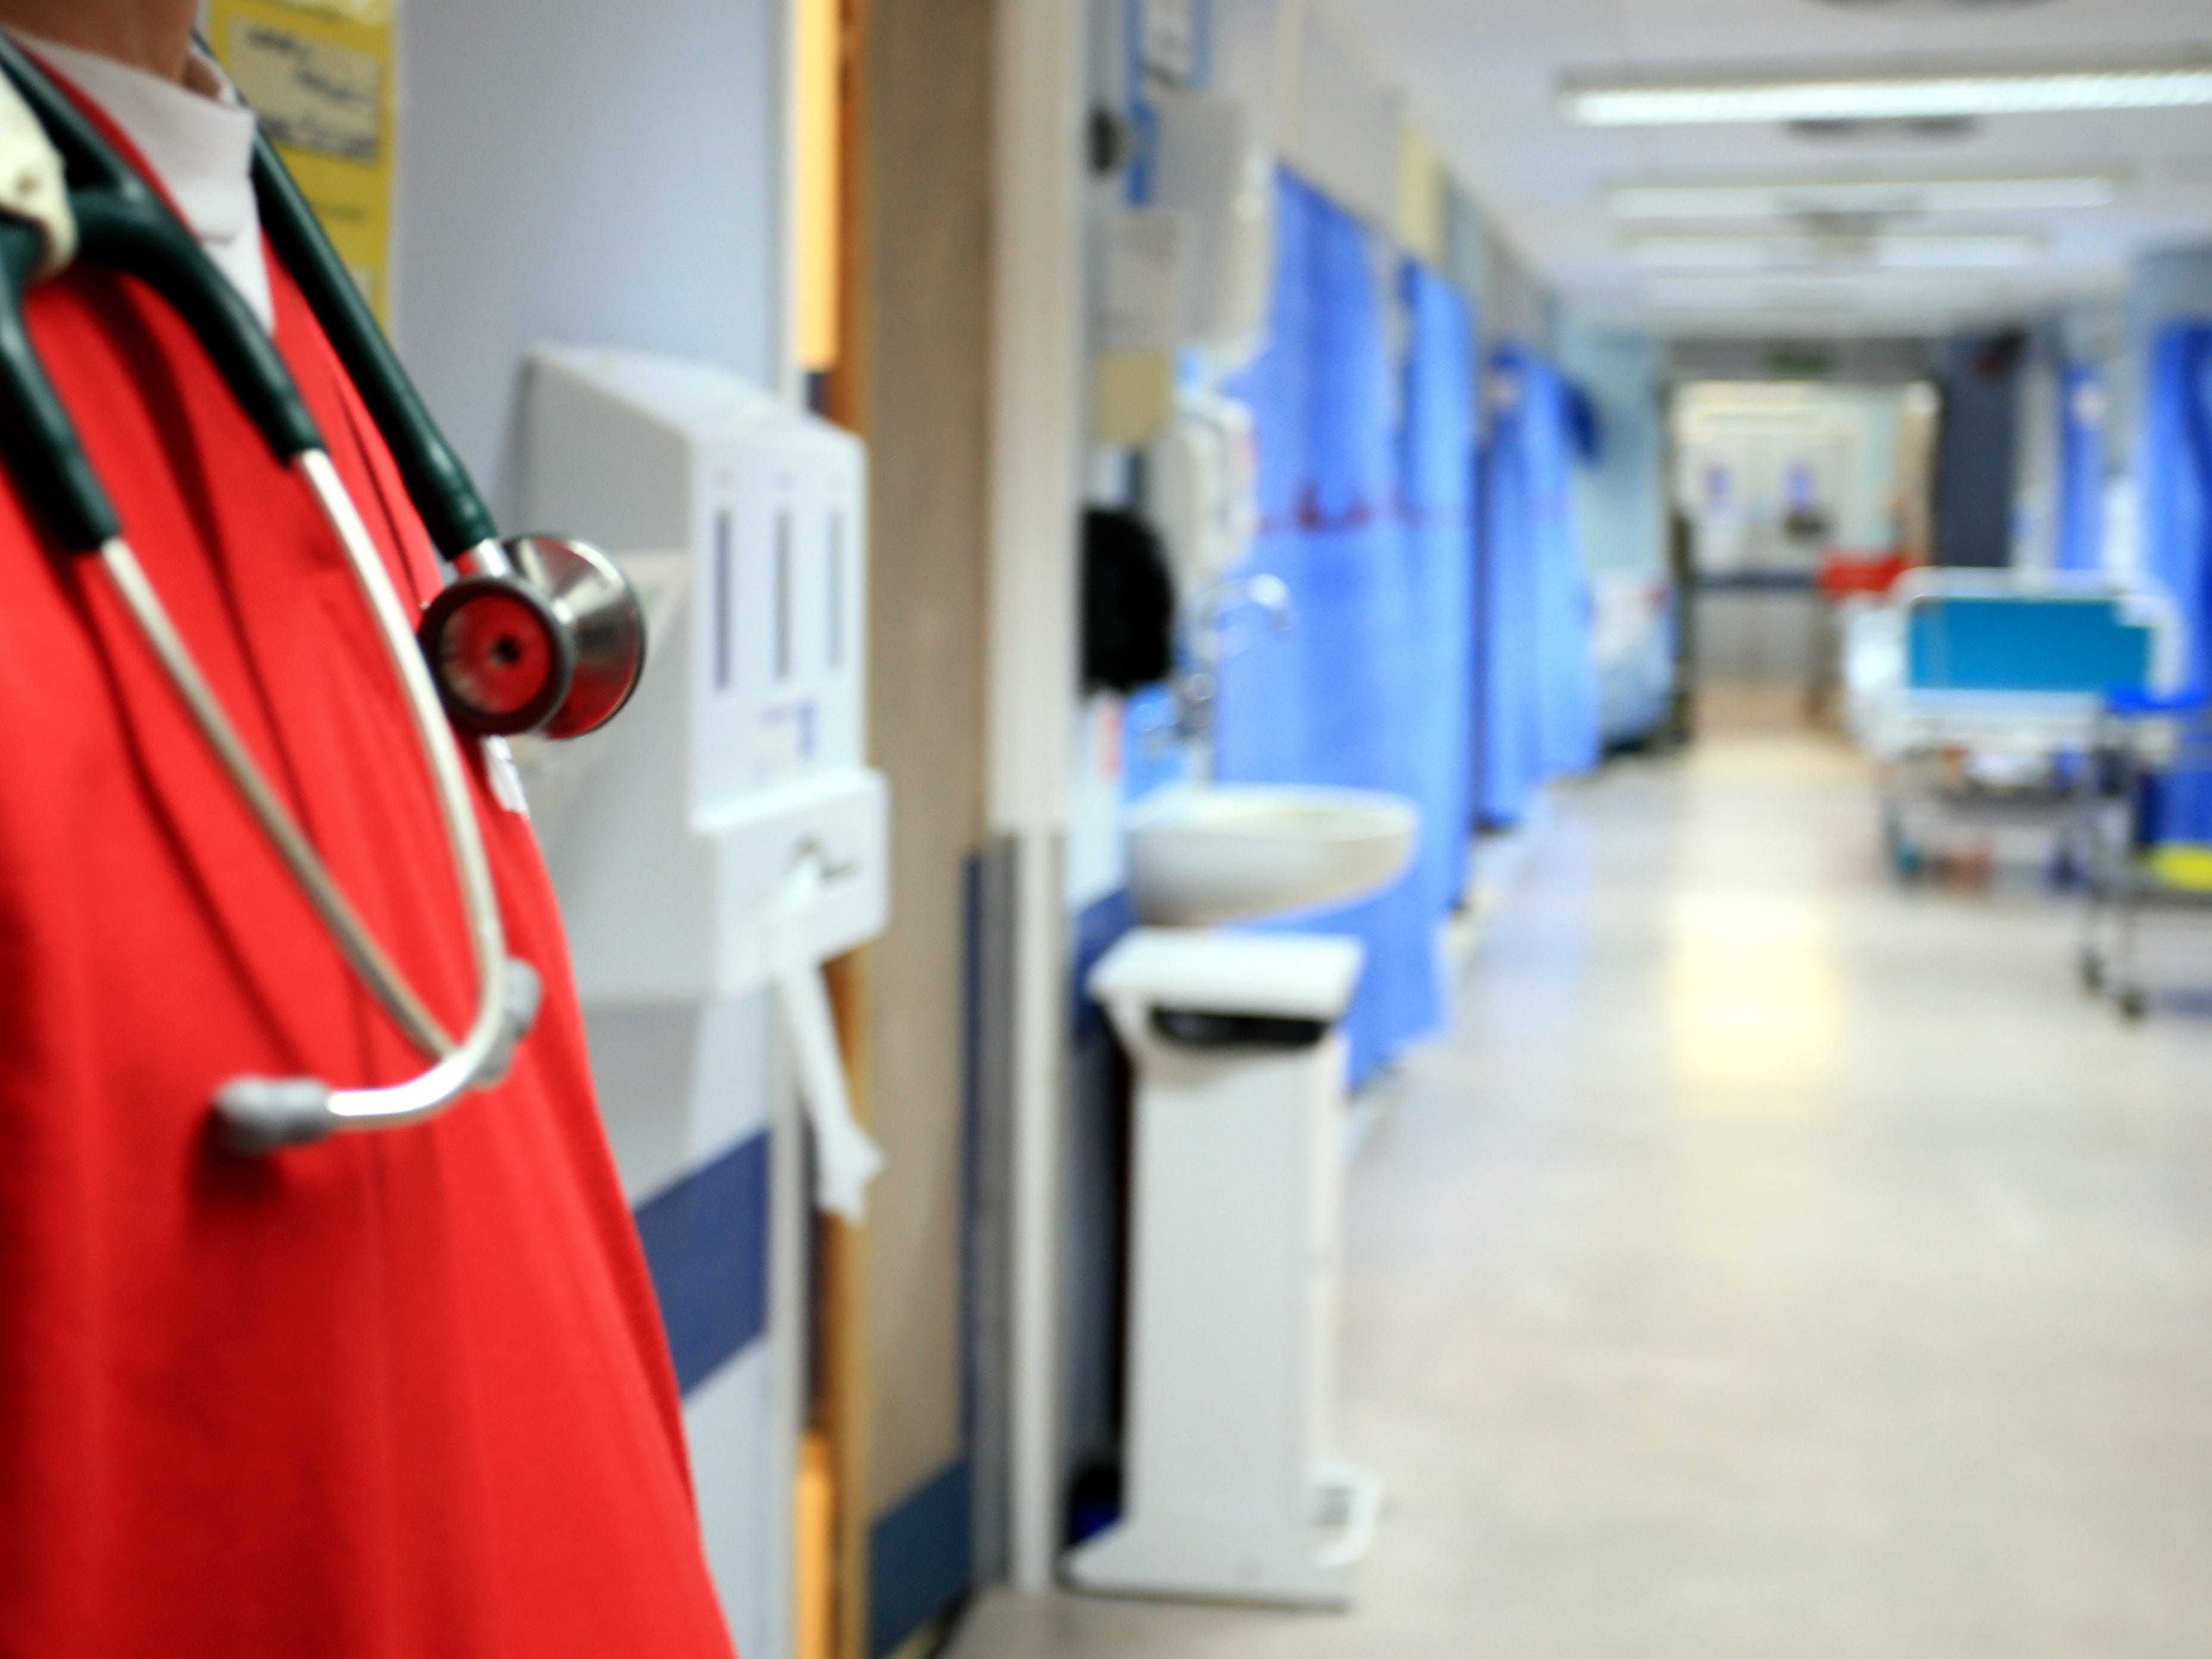 Patients ‘gaslighted’ and ‘fobbed off’ over NHS safety – commissioner